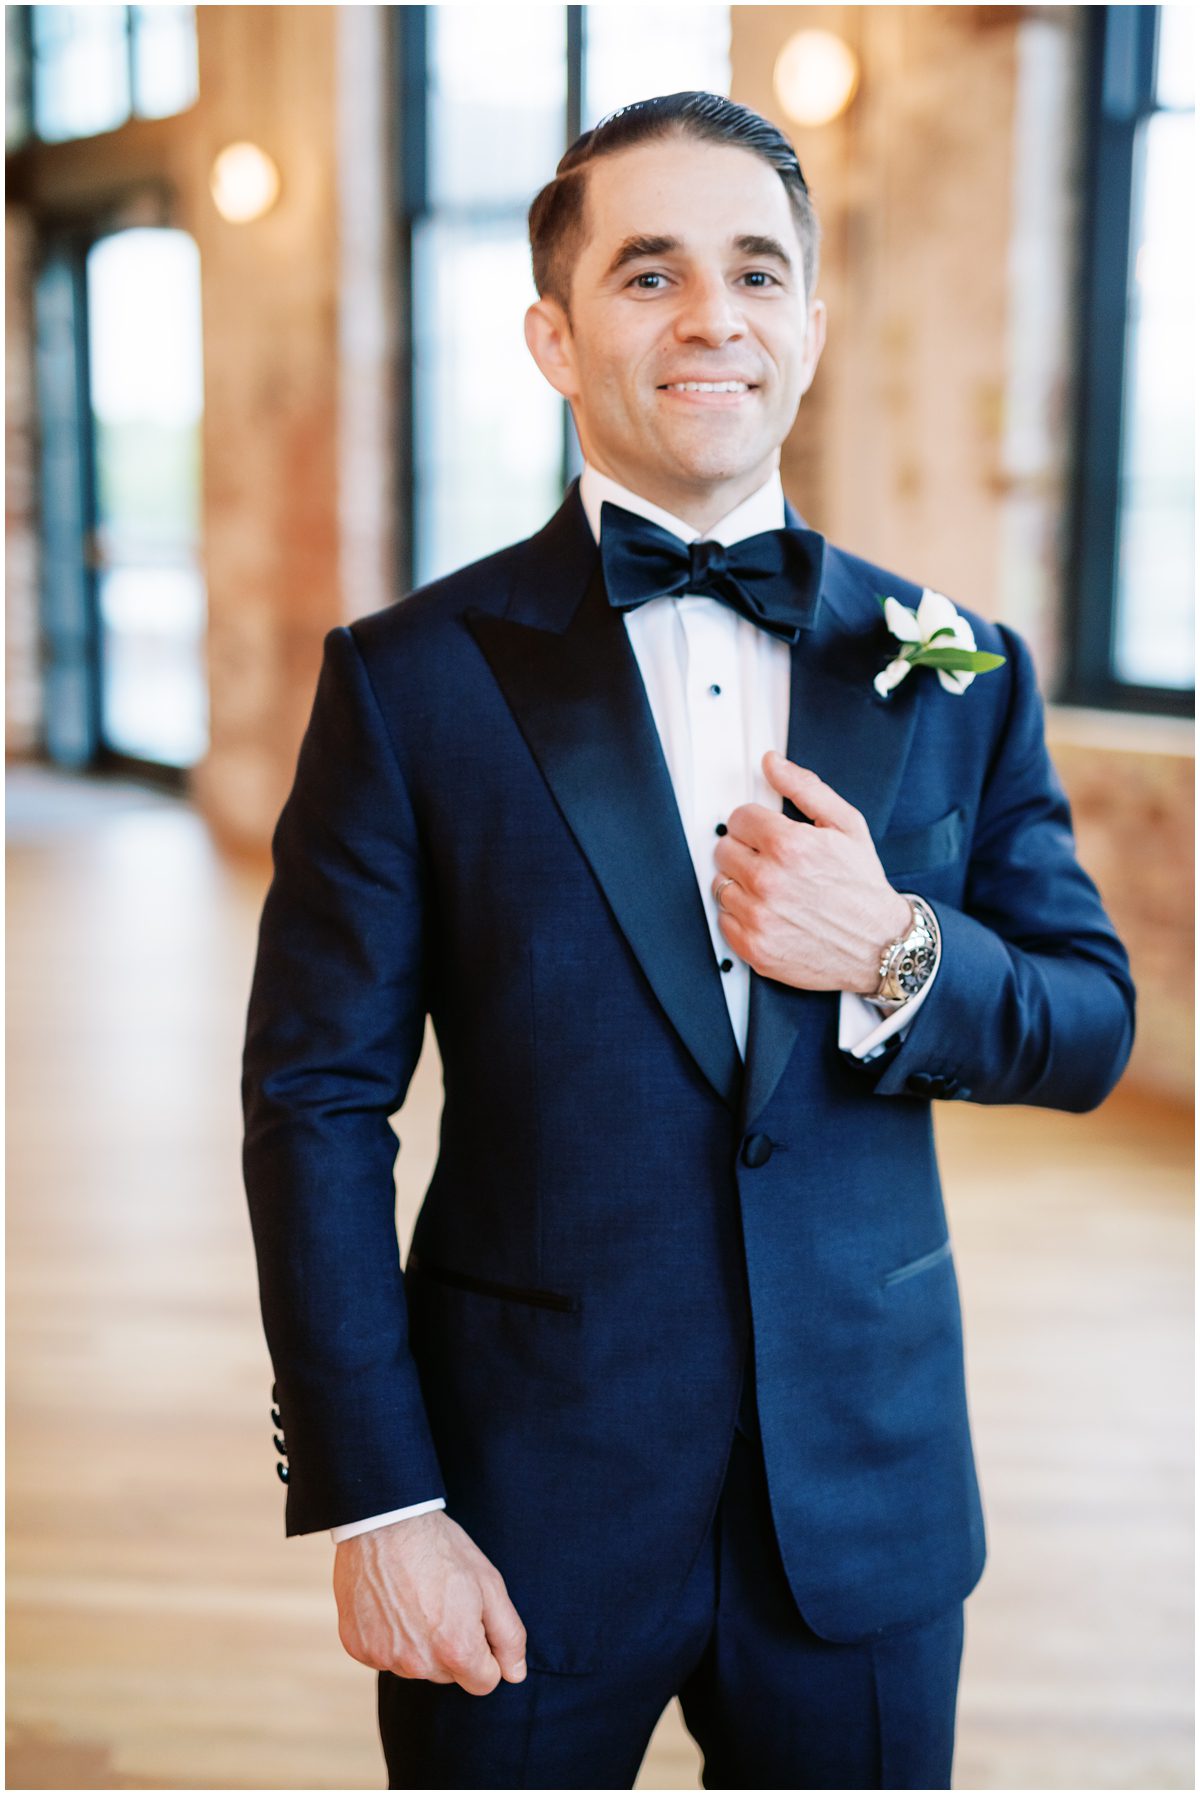 Modern groom wearing a custom navy blue suit and bowtie with a Rolex watch